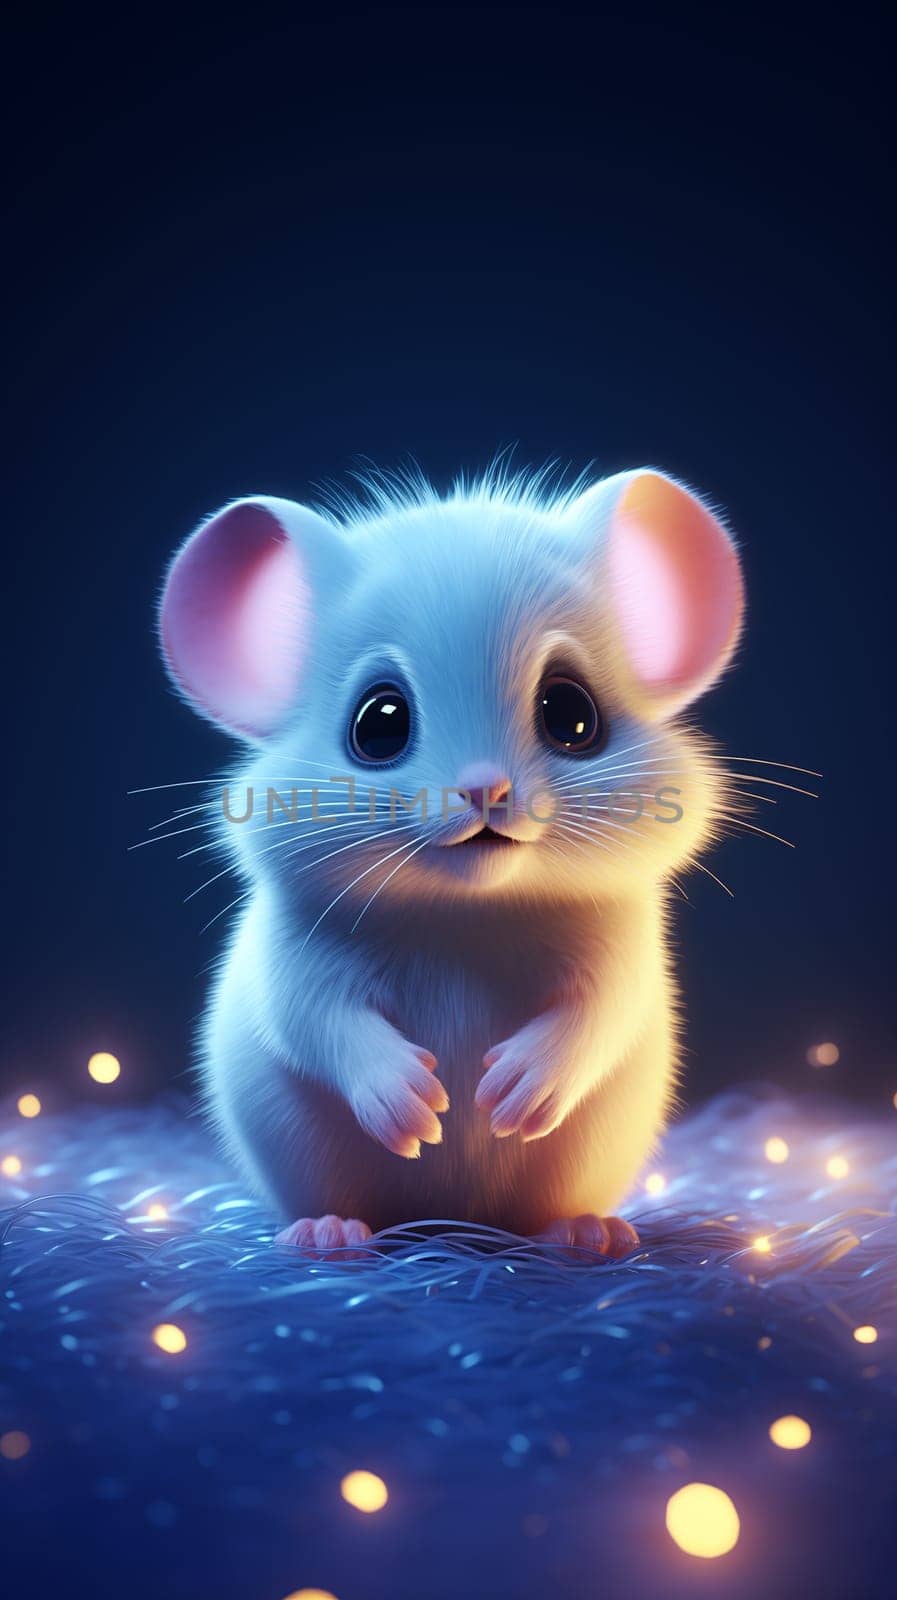 A cute cartoon mouse with big eyes and ears on magical background by chrisroll